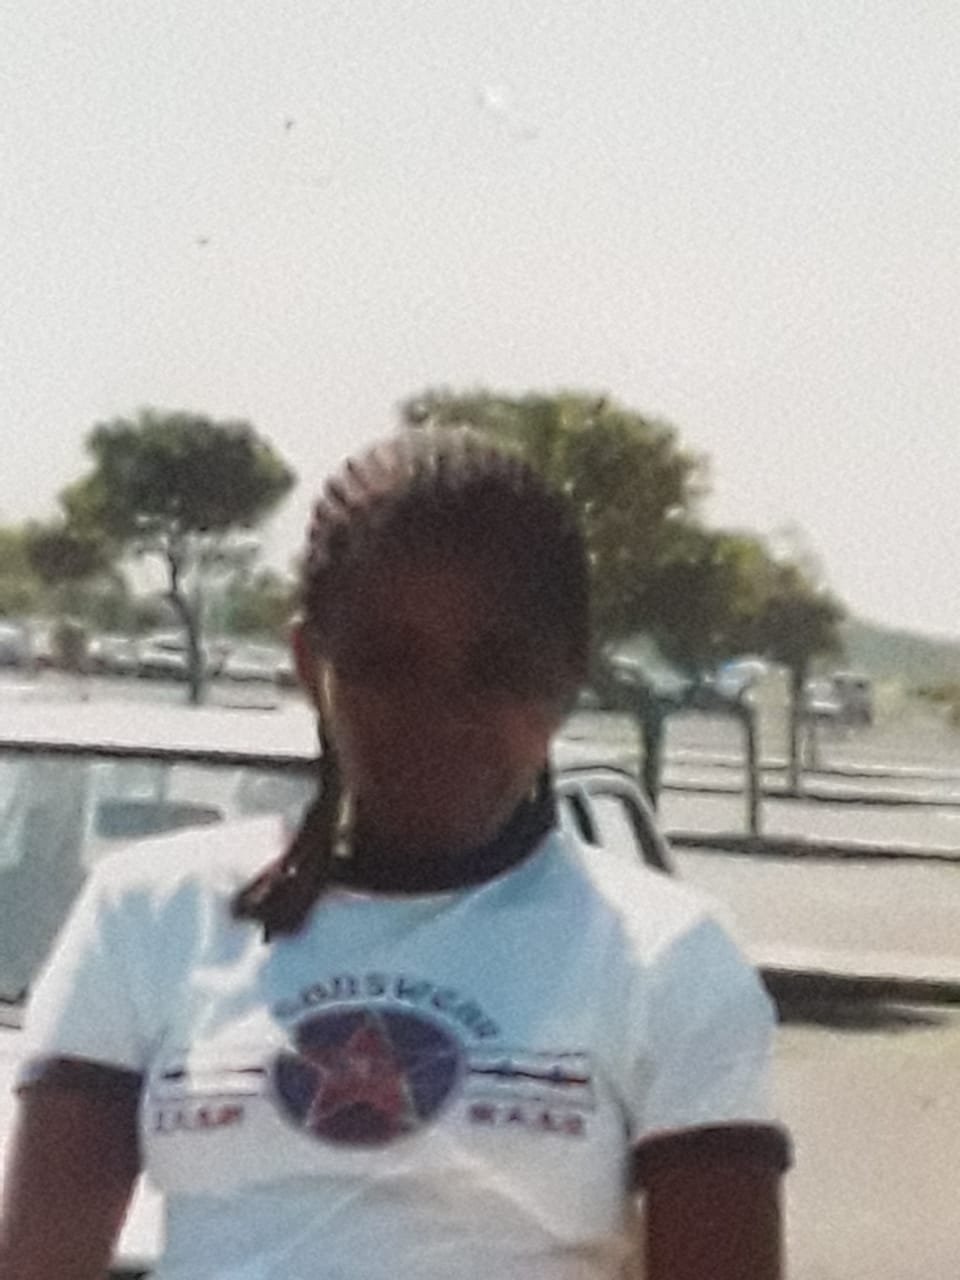 Community assistance sought by Swartkops Detectives to locate missing woman